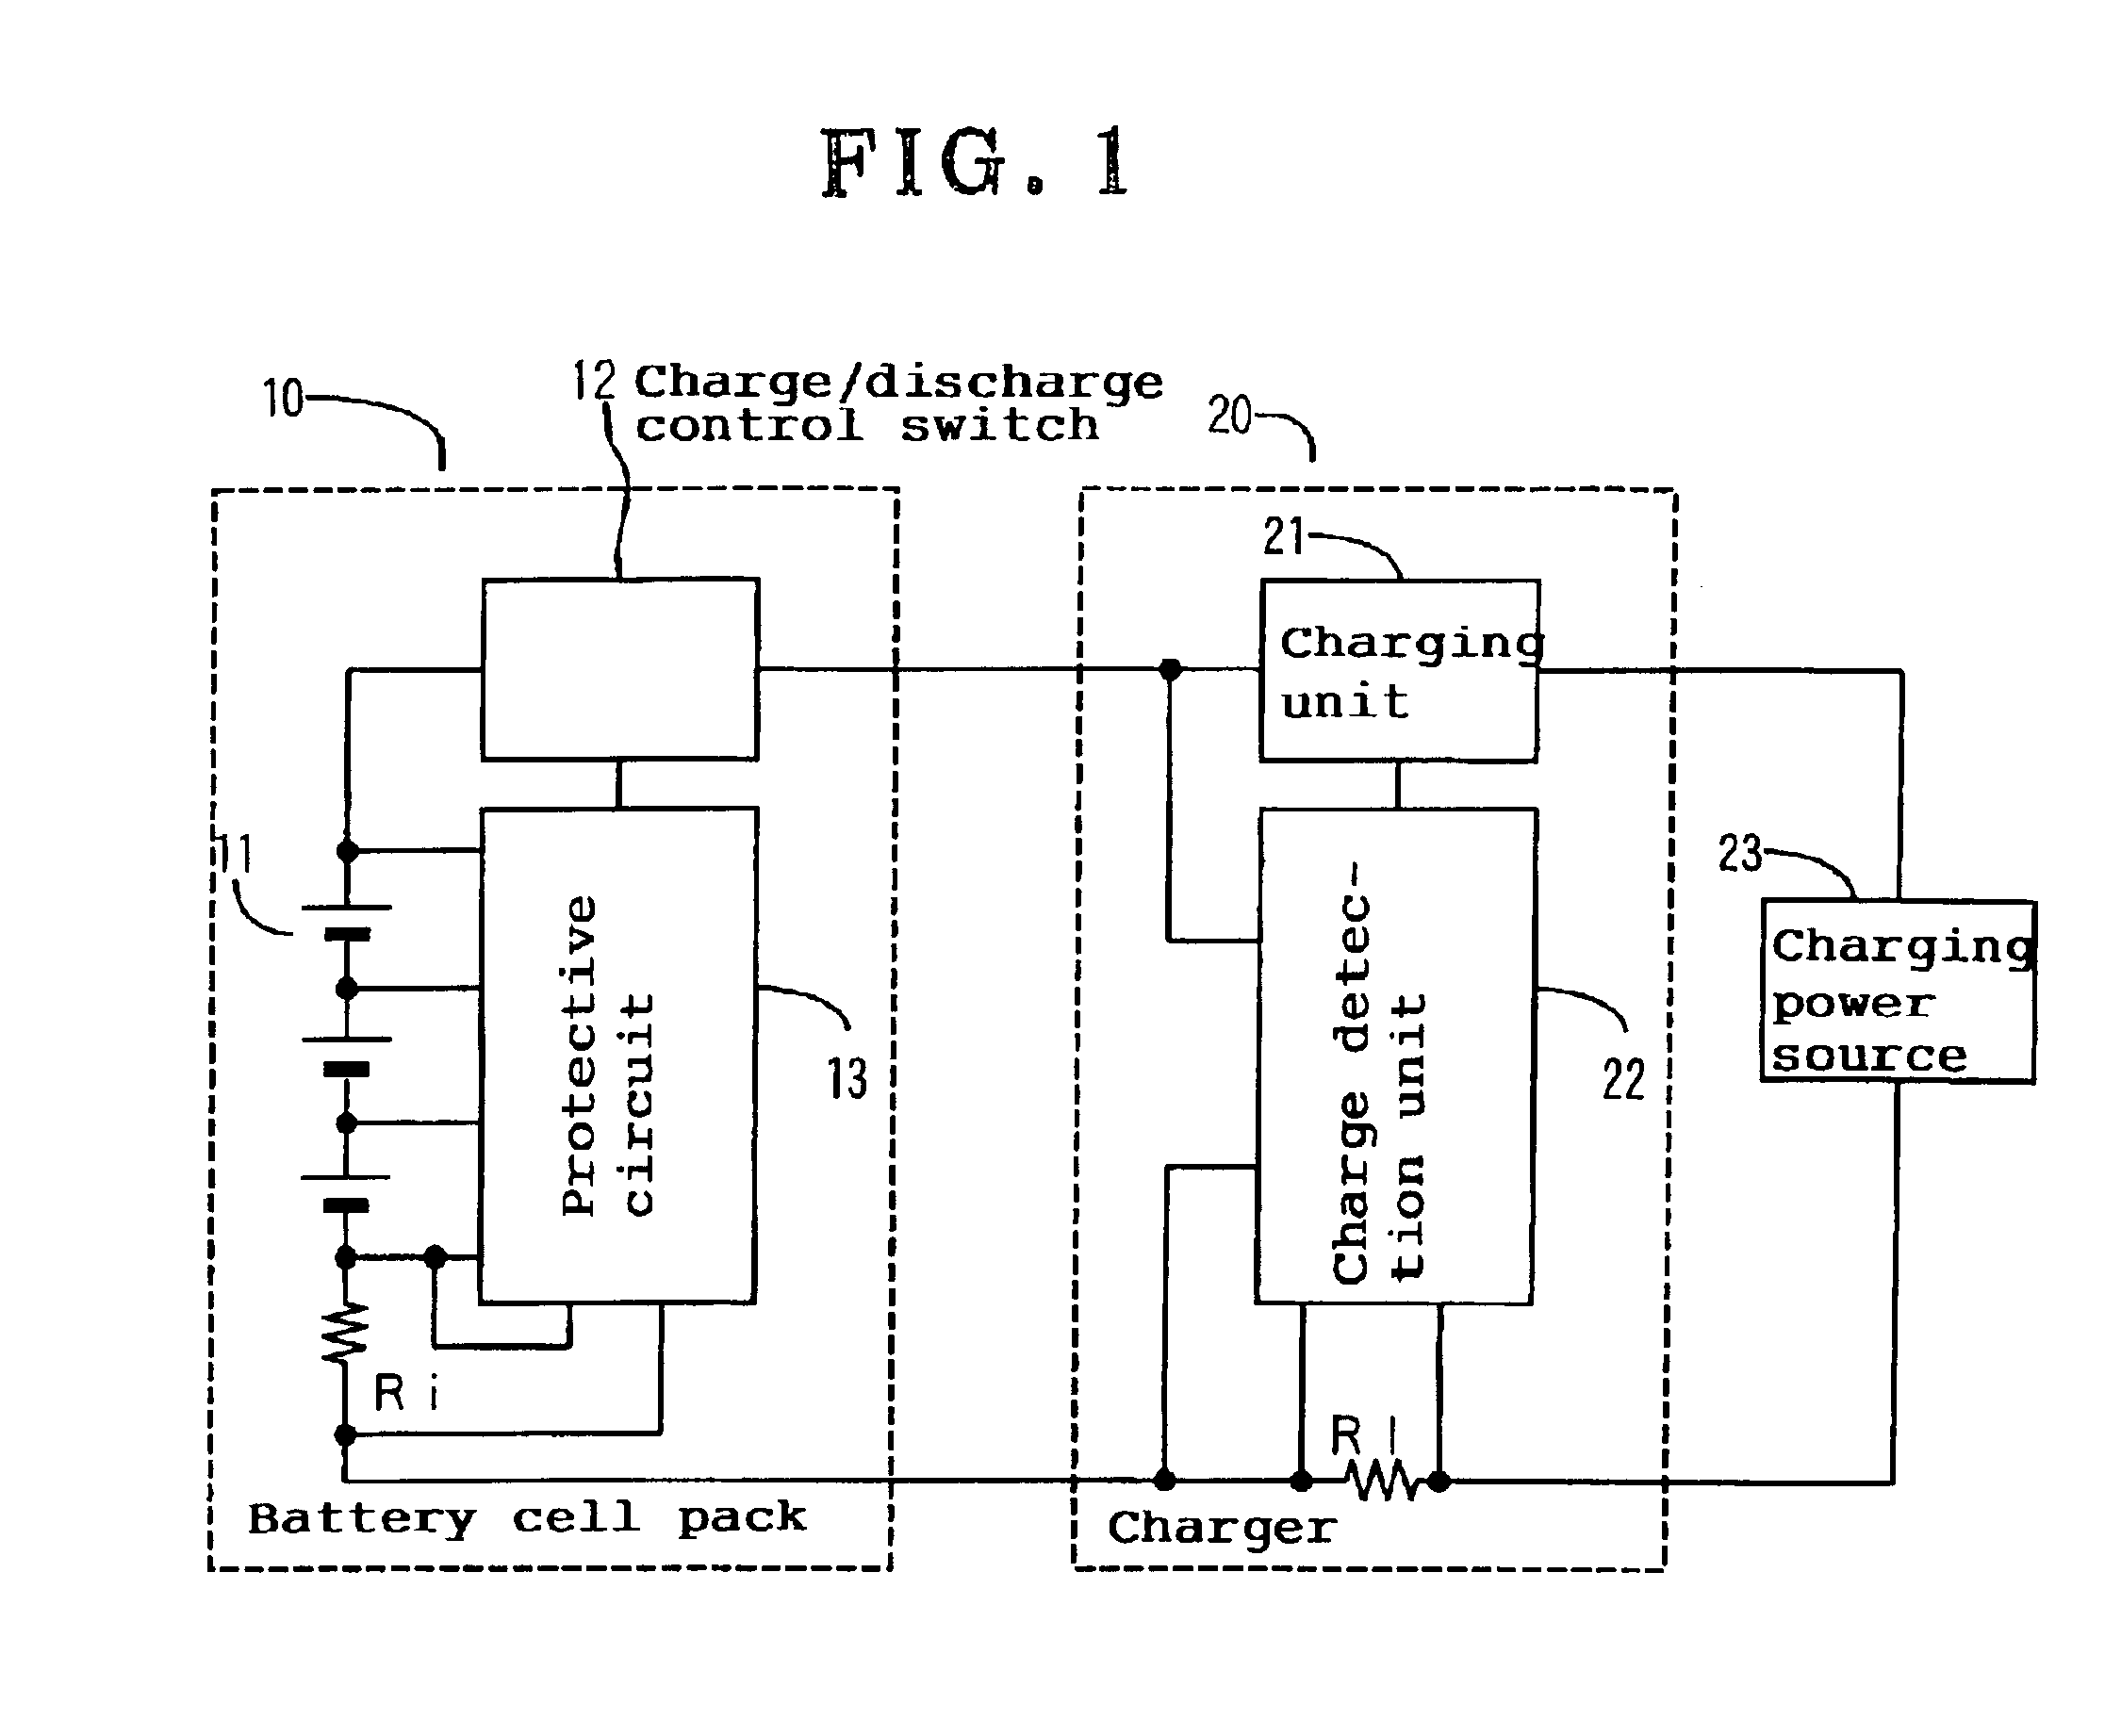 Multi-series connection type battery cell pack for reducing self-consumption over a long period of time